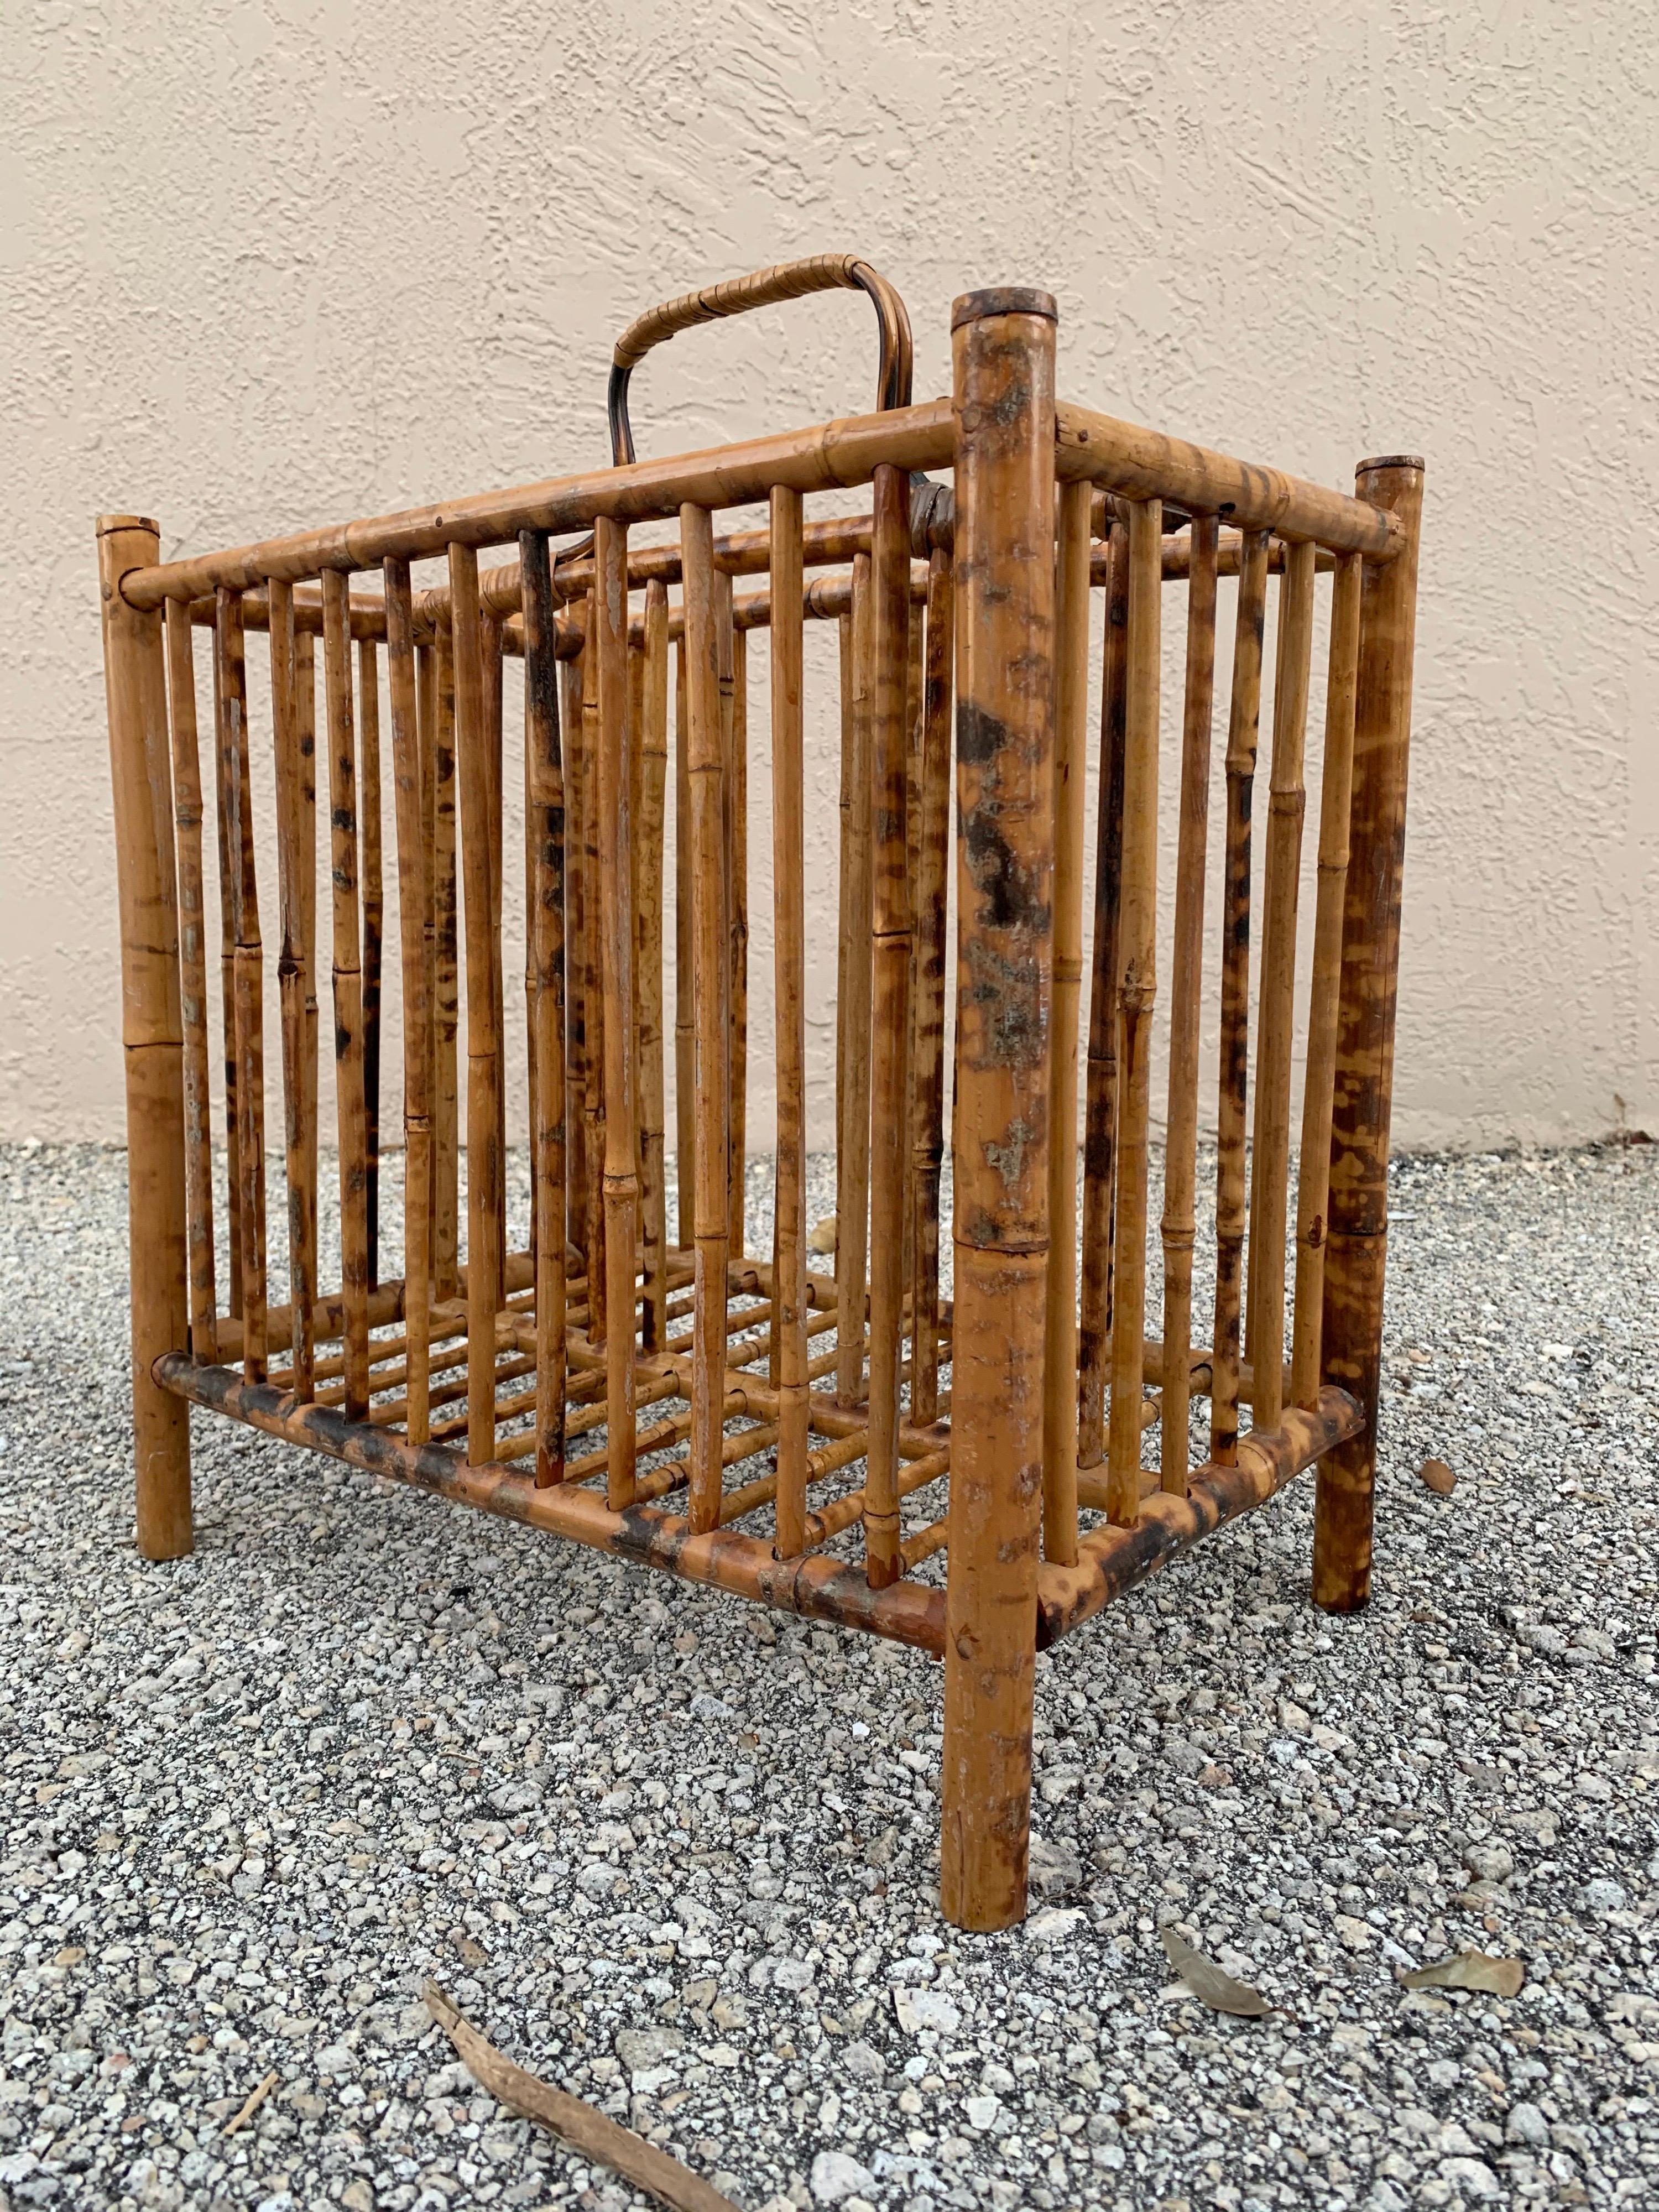 Unusual British Colonial magazine rack. Made with burnt bamboo. Simple elegant design. Well made and kept.